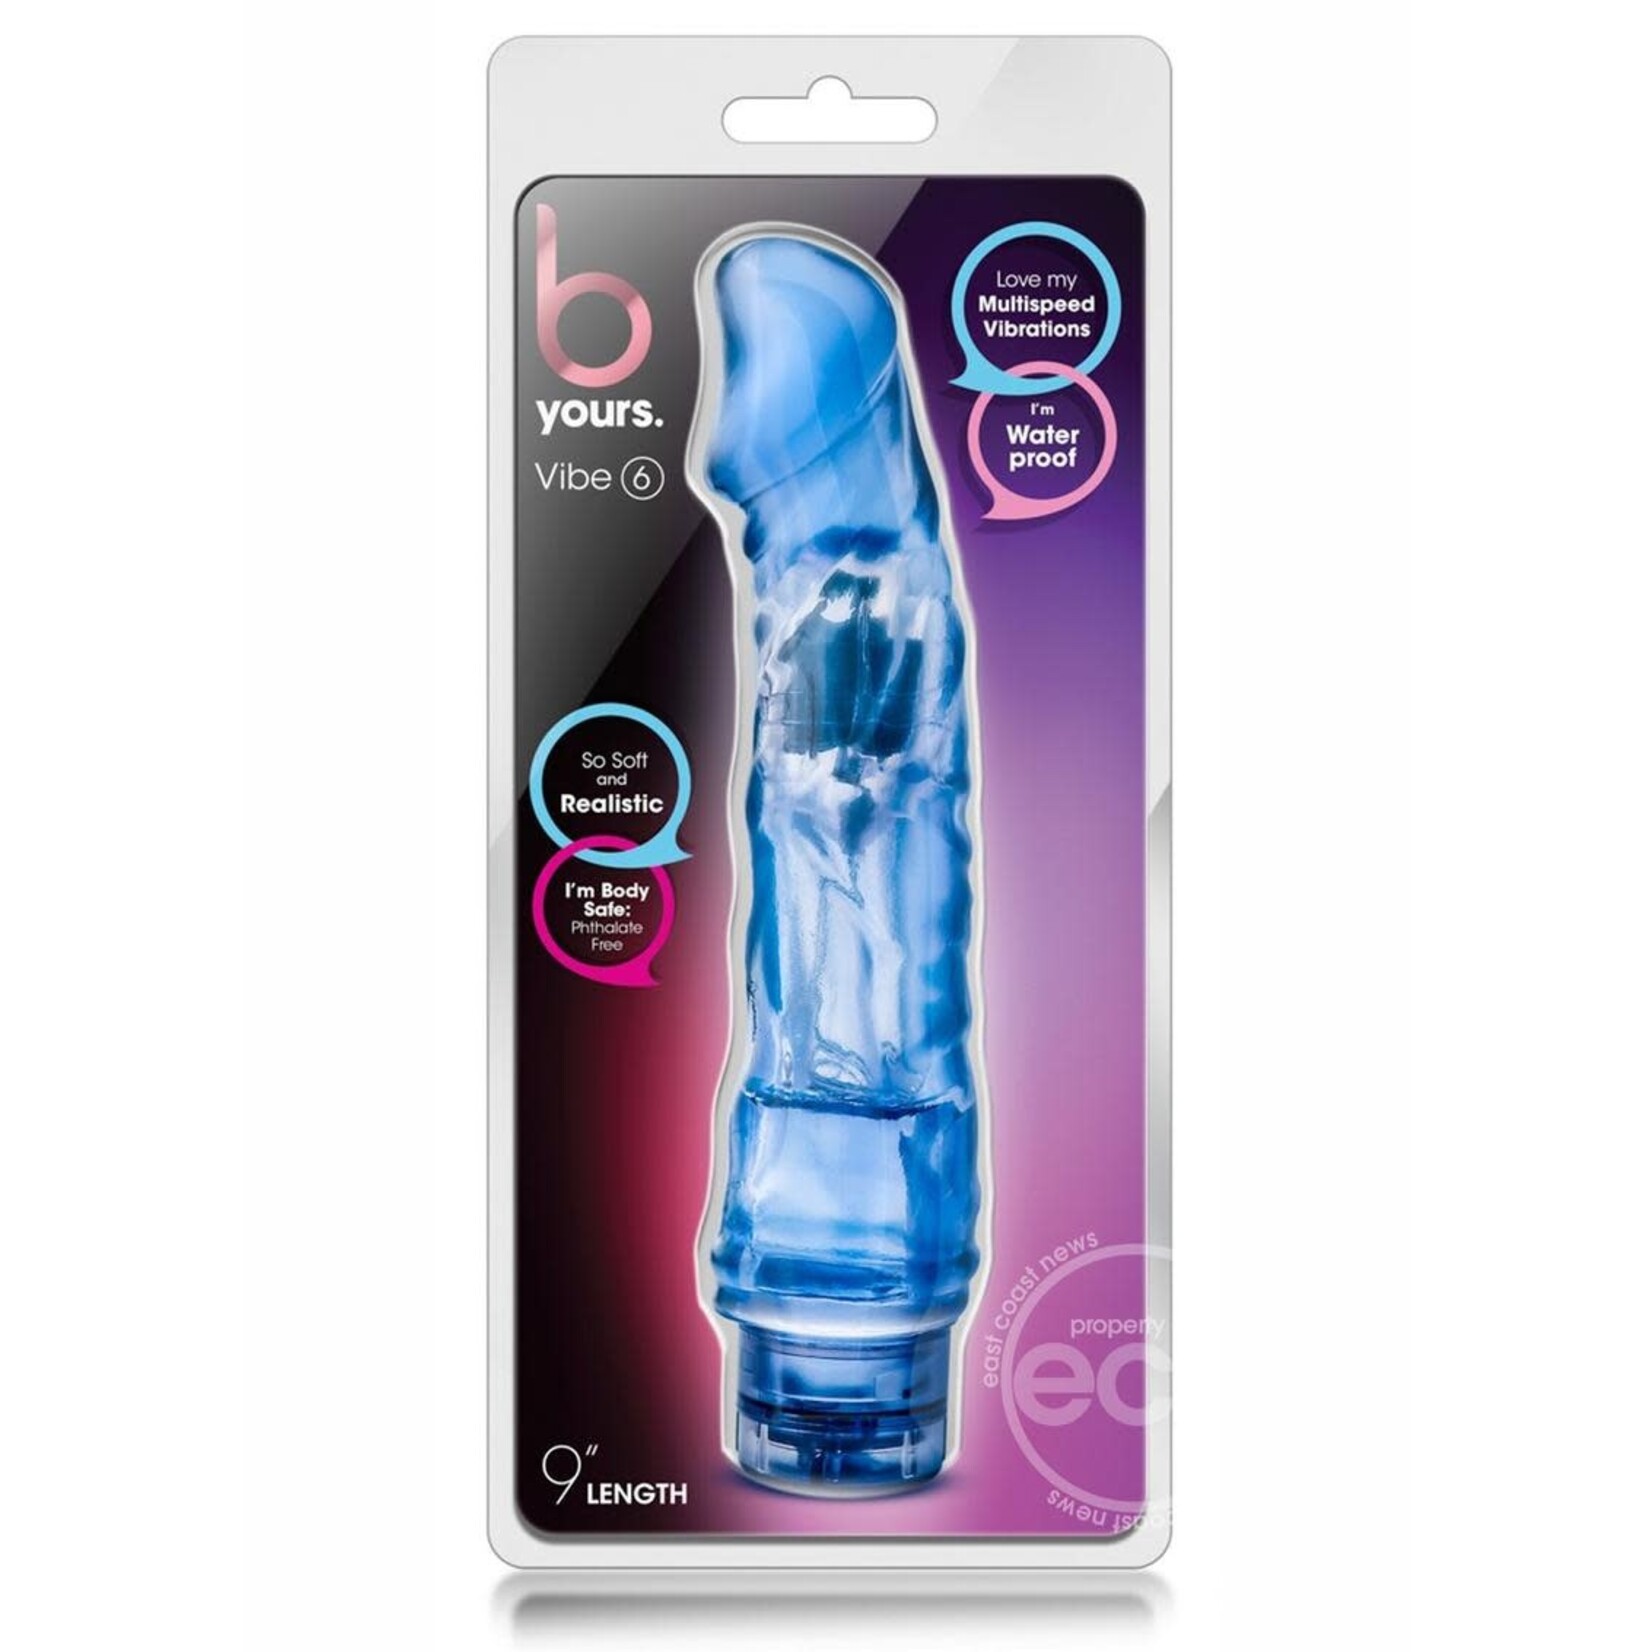 B Yours Vibe 6 Vibrating Dildo 9in - Blue